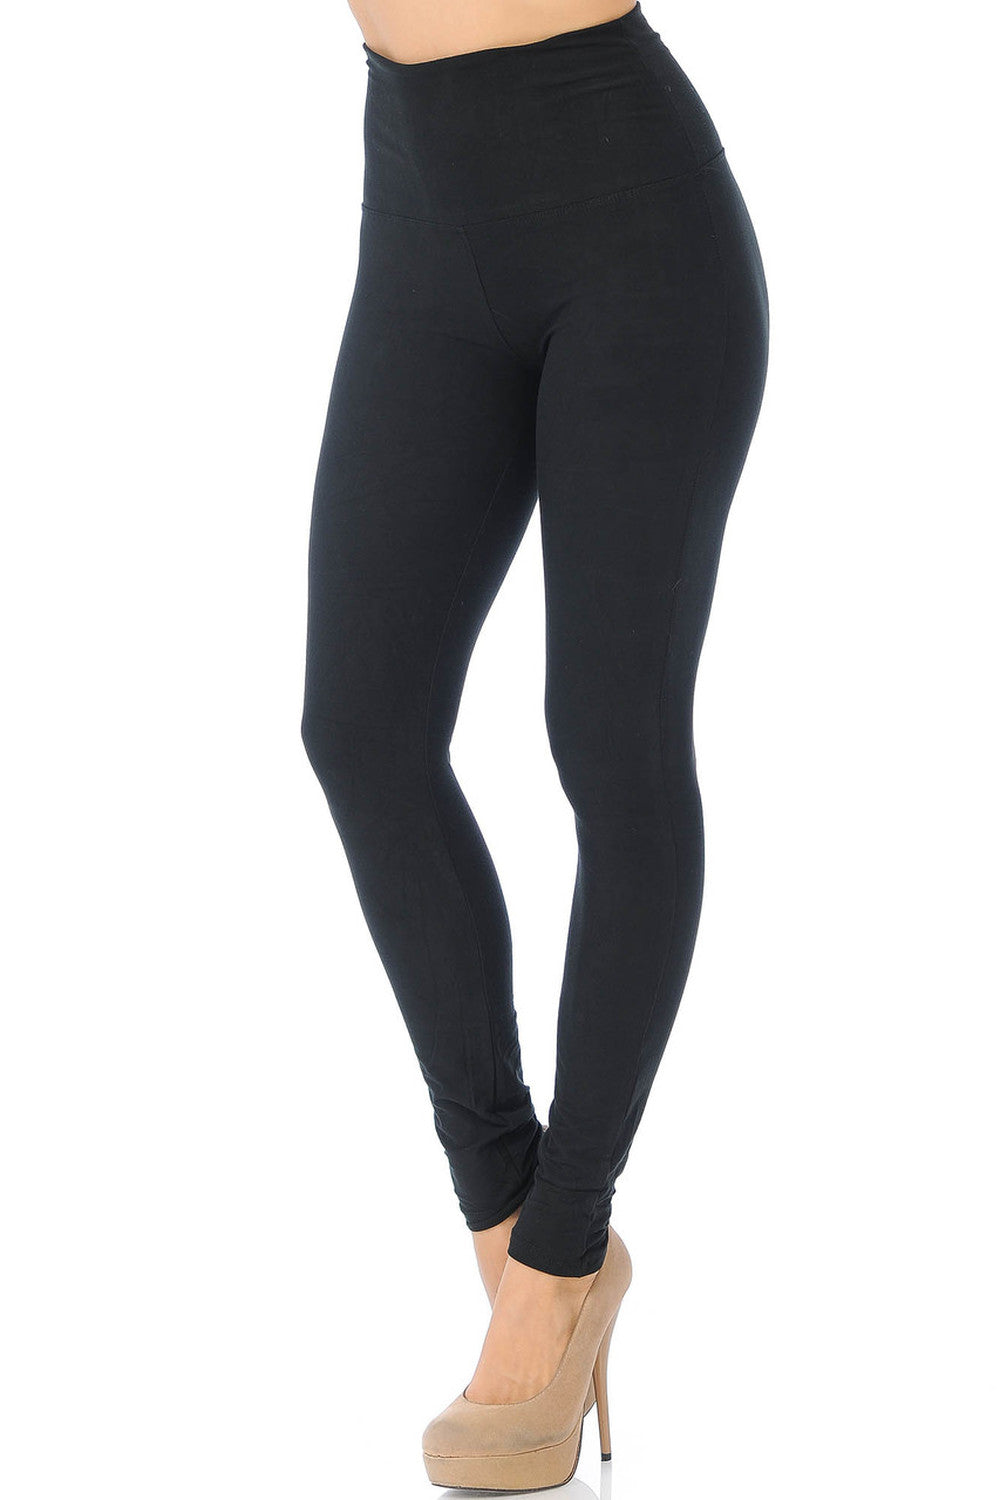 The Hailey Leggings - One Size